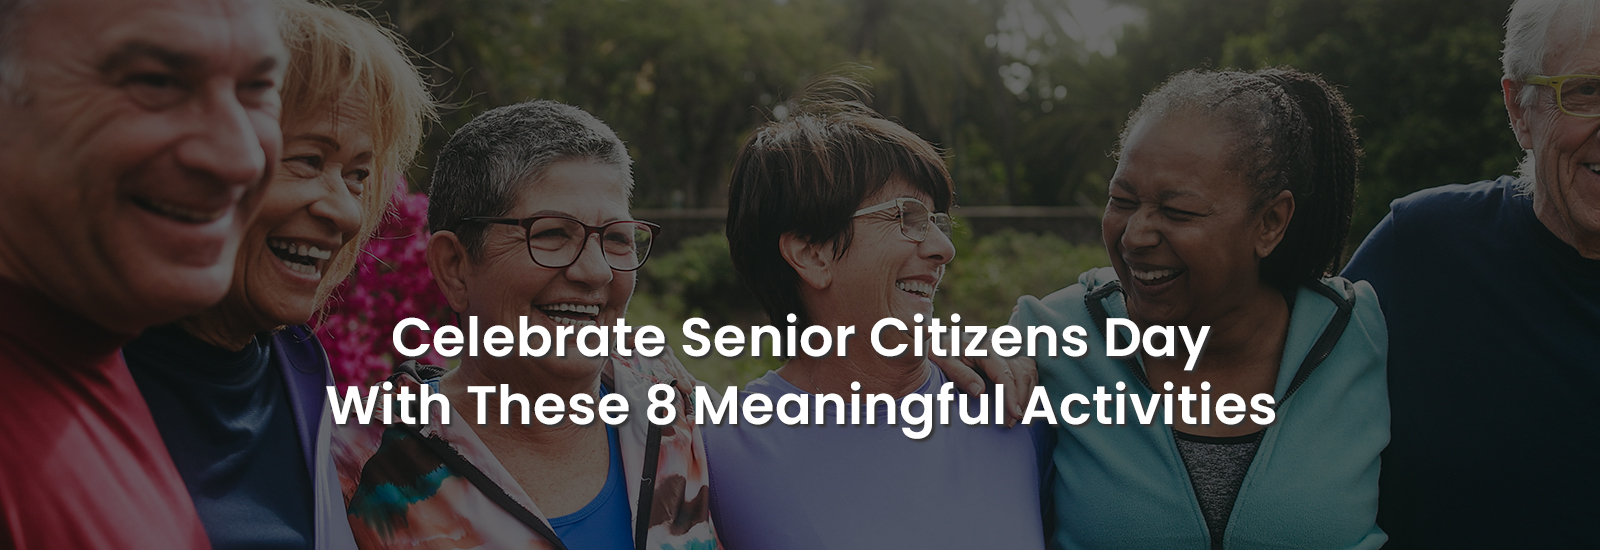 8 Activities to Make Senior Citizen Day Special